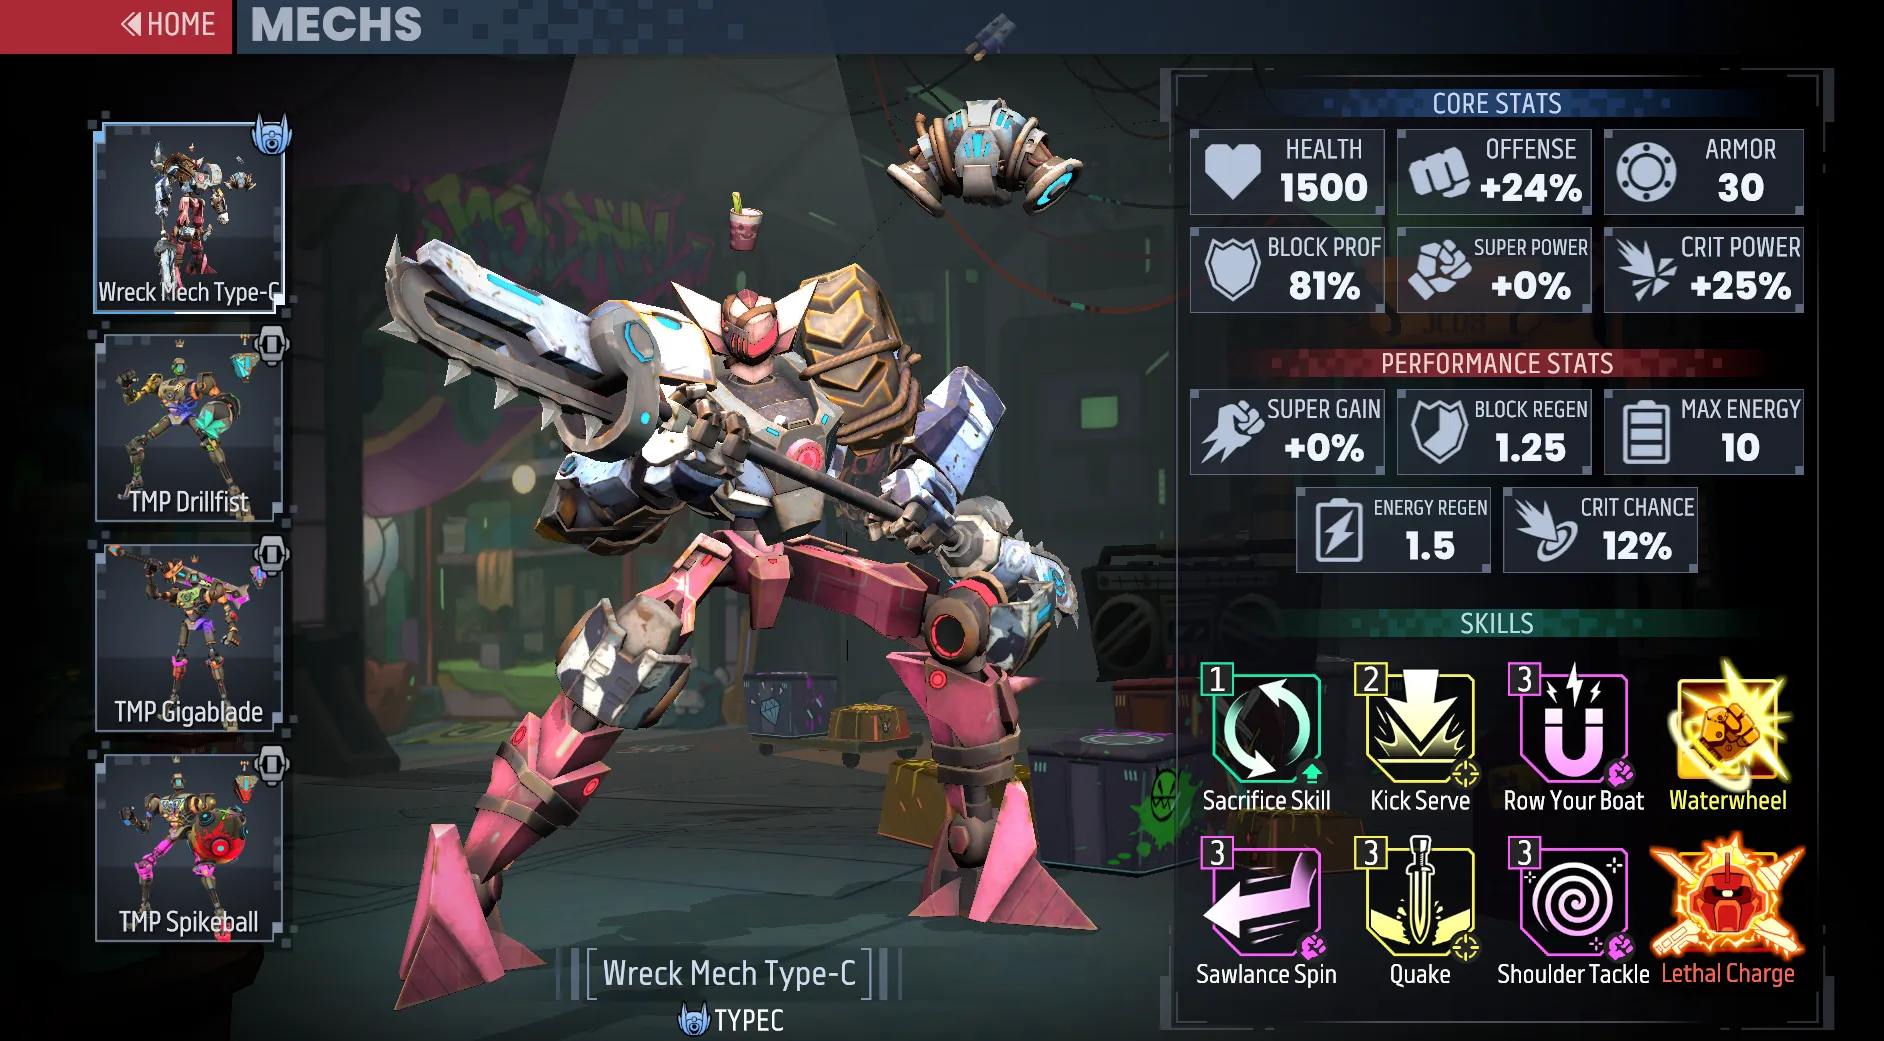 3D rendered mech with pink legs holding a long lance with a chainsaw blade at the end.